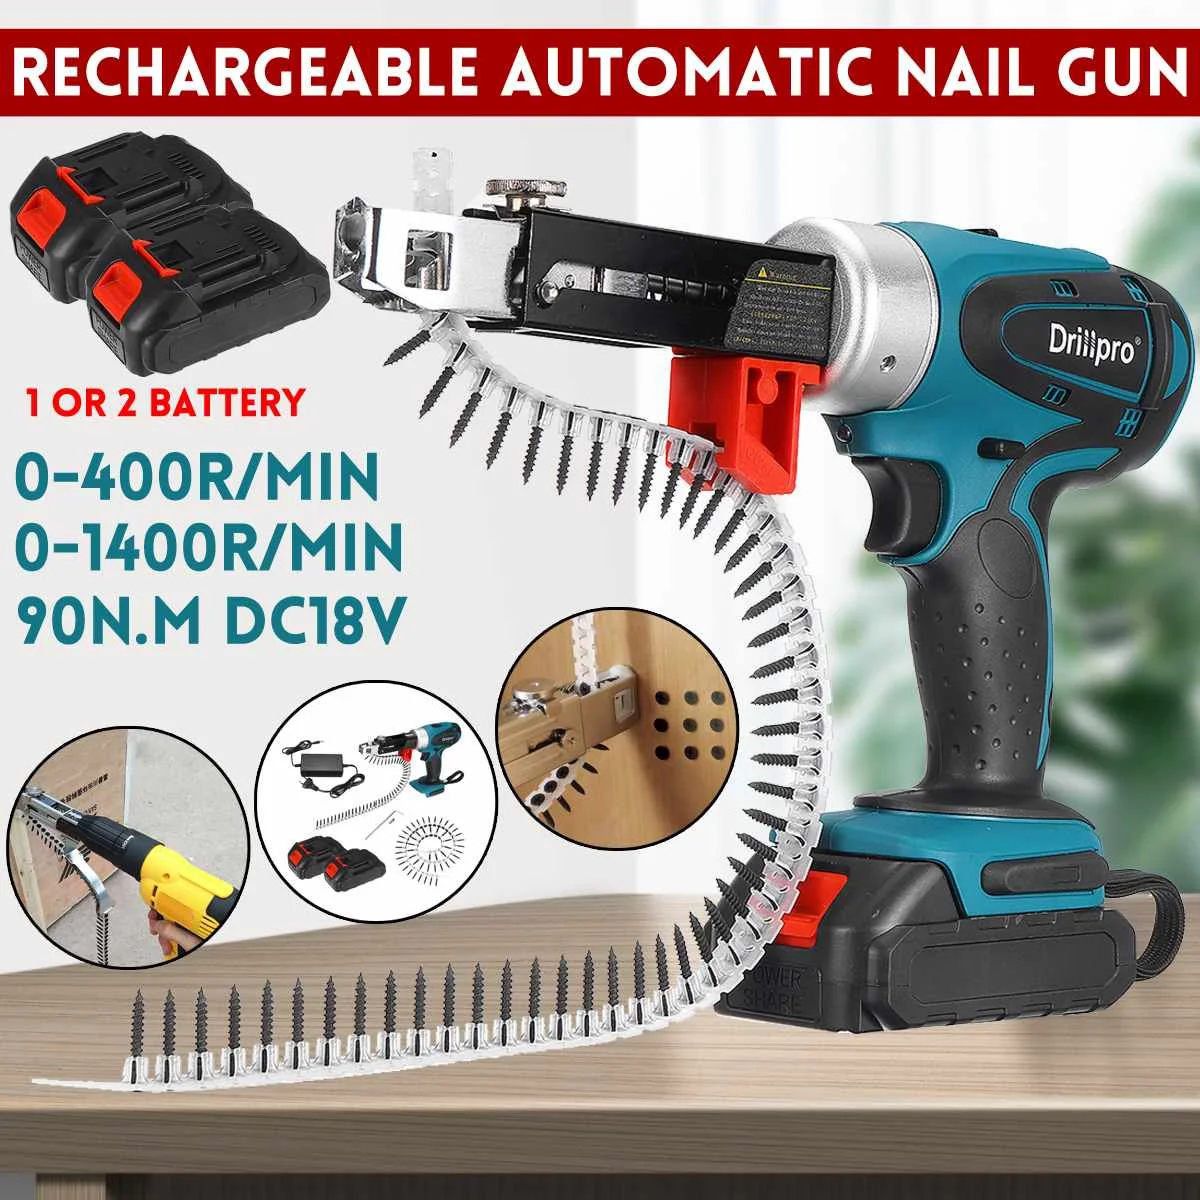 

Drillpro 90N.m Brushless Electric Nail Gun Nailer Stapler Woodworking Electric Tacker Furniture Power Tools with 1 or 2 Battery